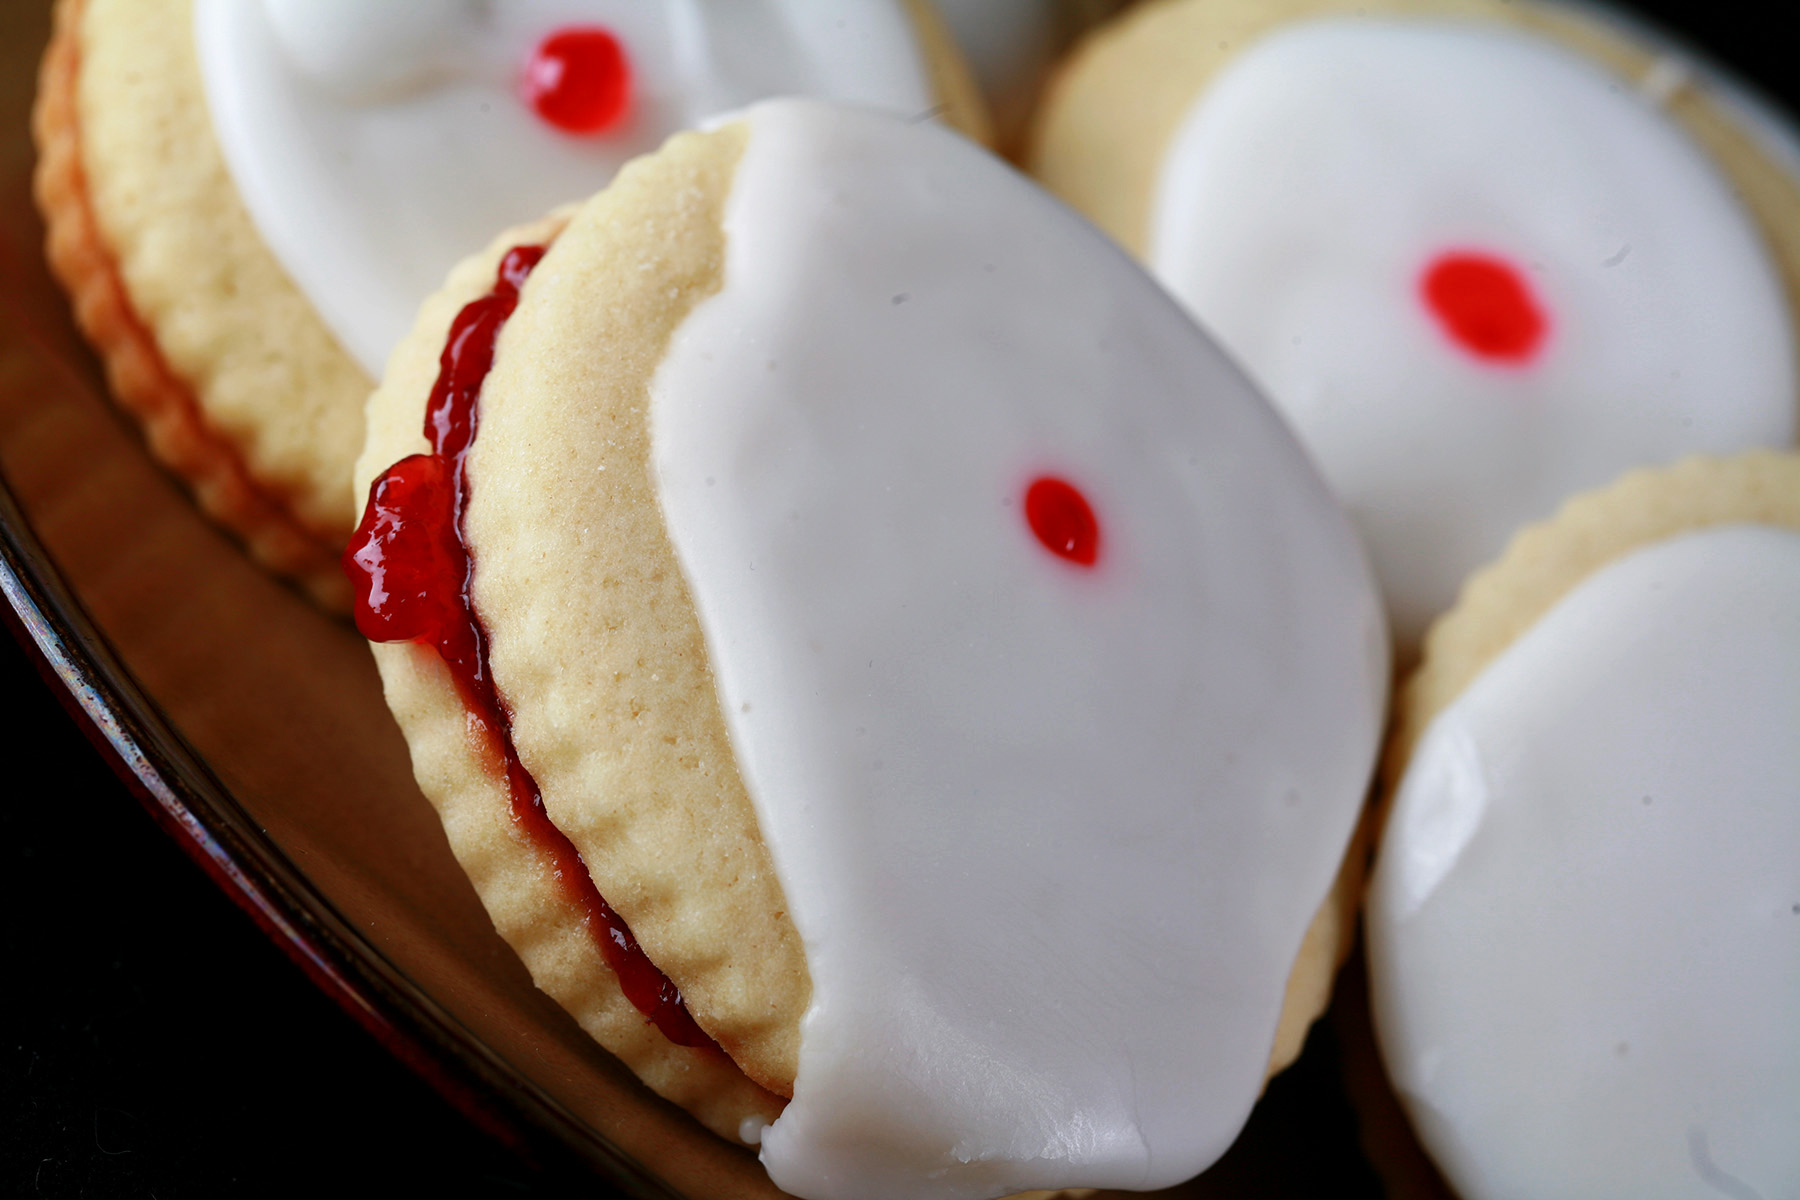 Close up view of a plate of Gluten-Free Empire Biscuits - sandwich cookies filled with raspberry jam, frosted with a white glaze, and finished off with a dot of red gel in the center.